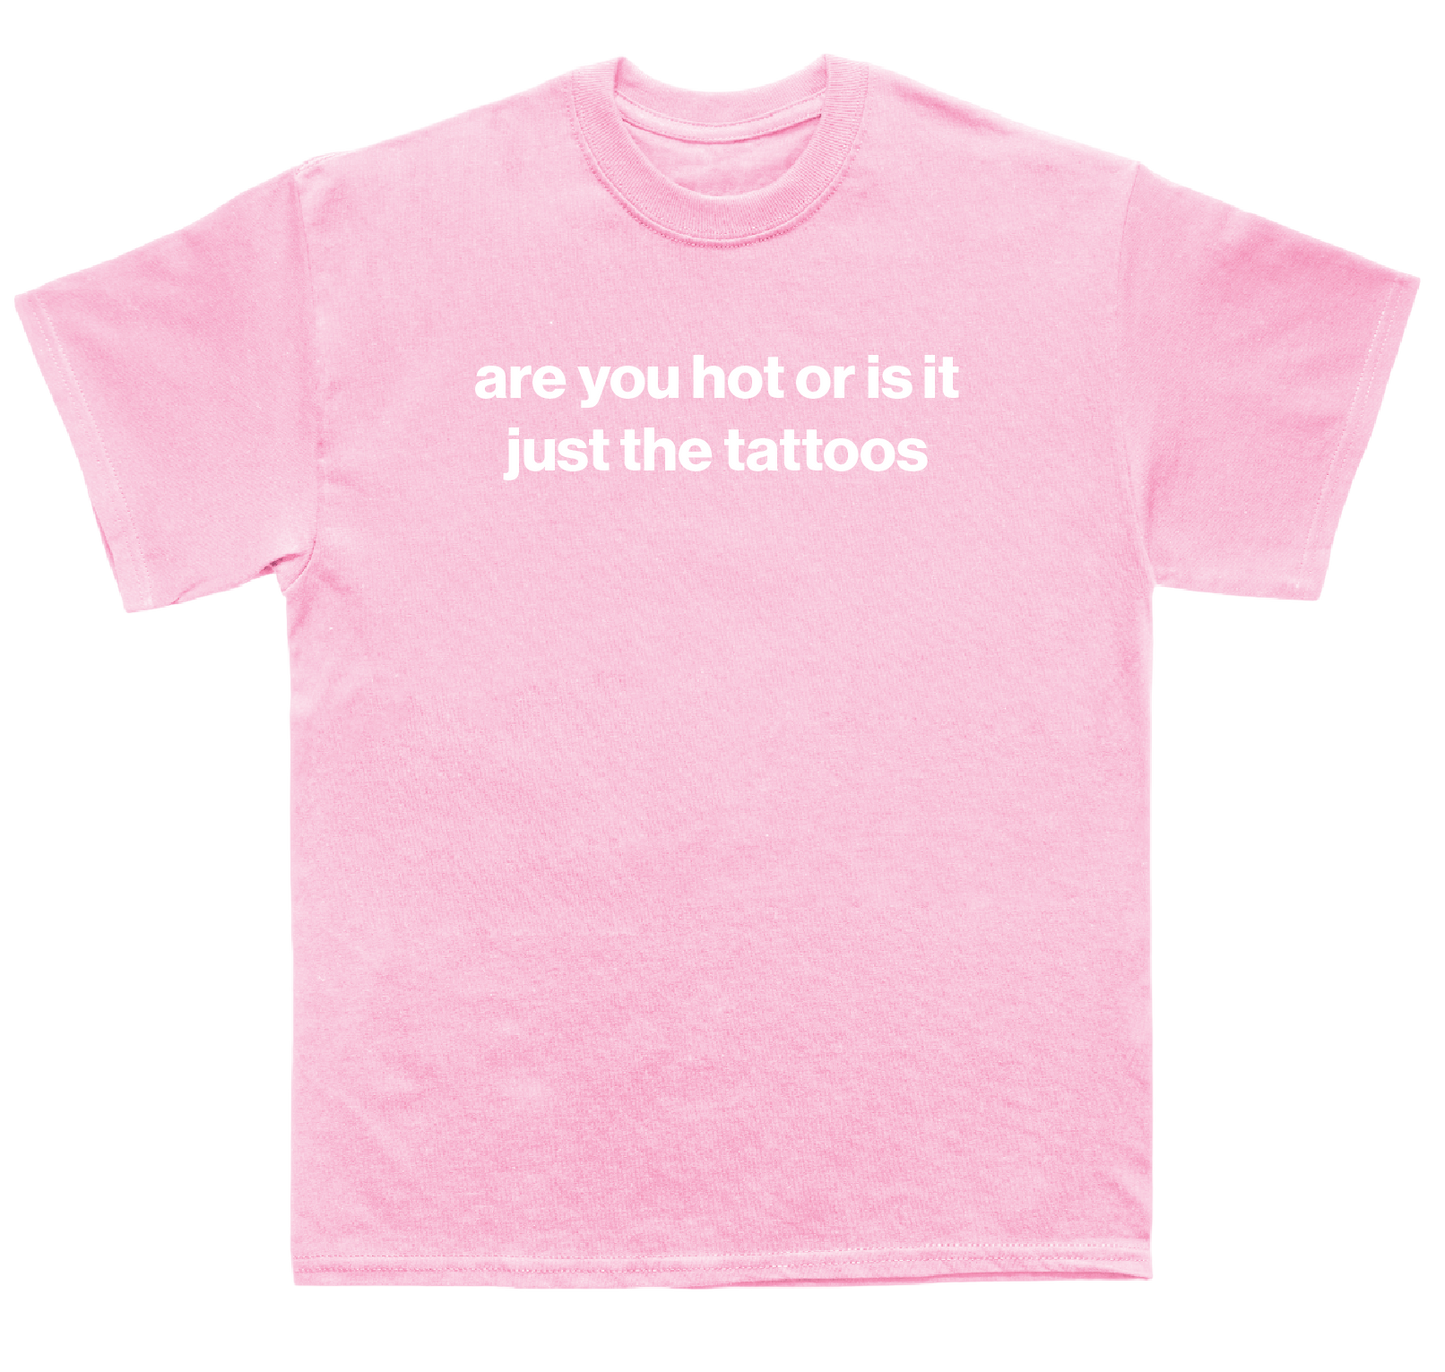 are you hot or is it just the tattoos shirt